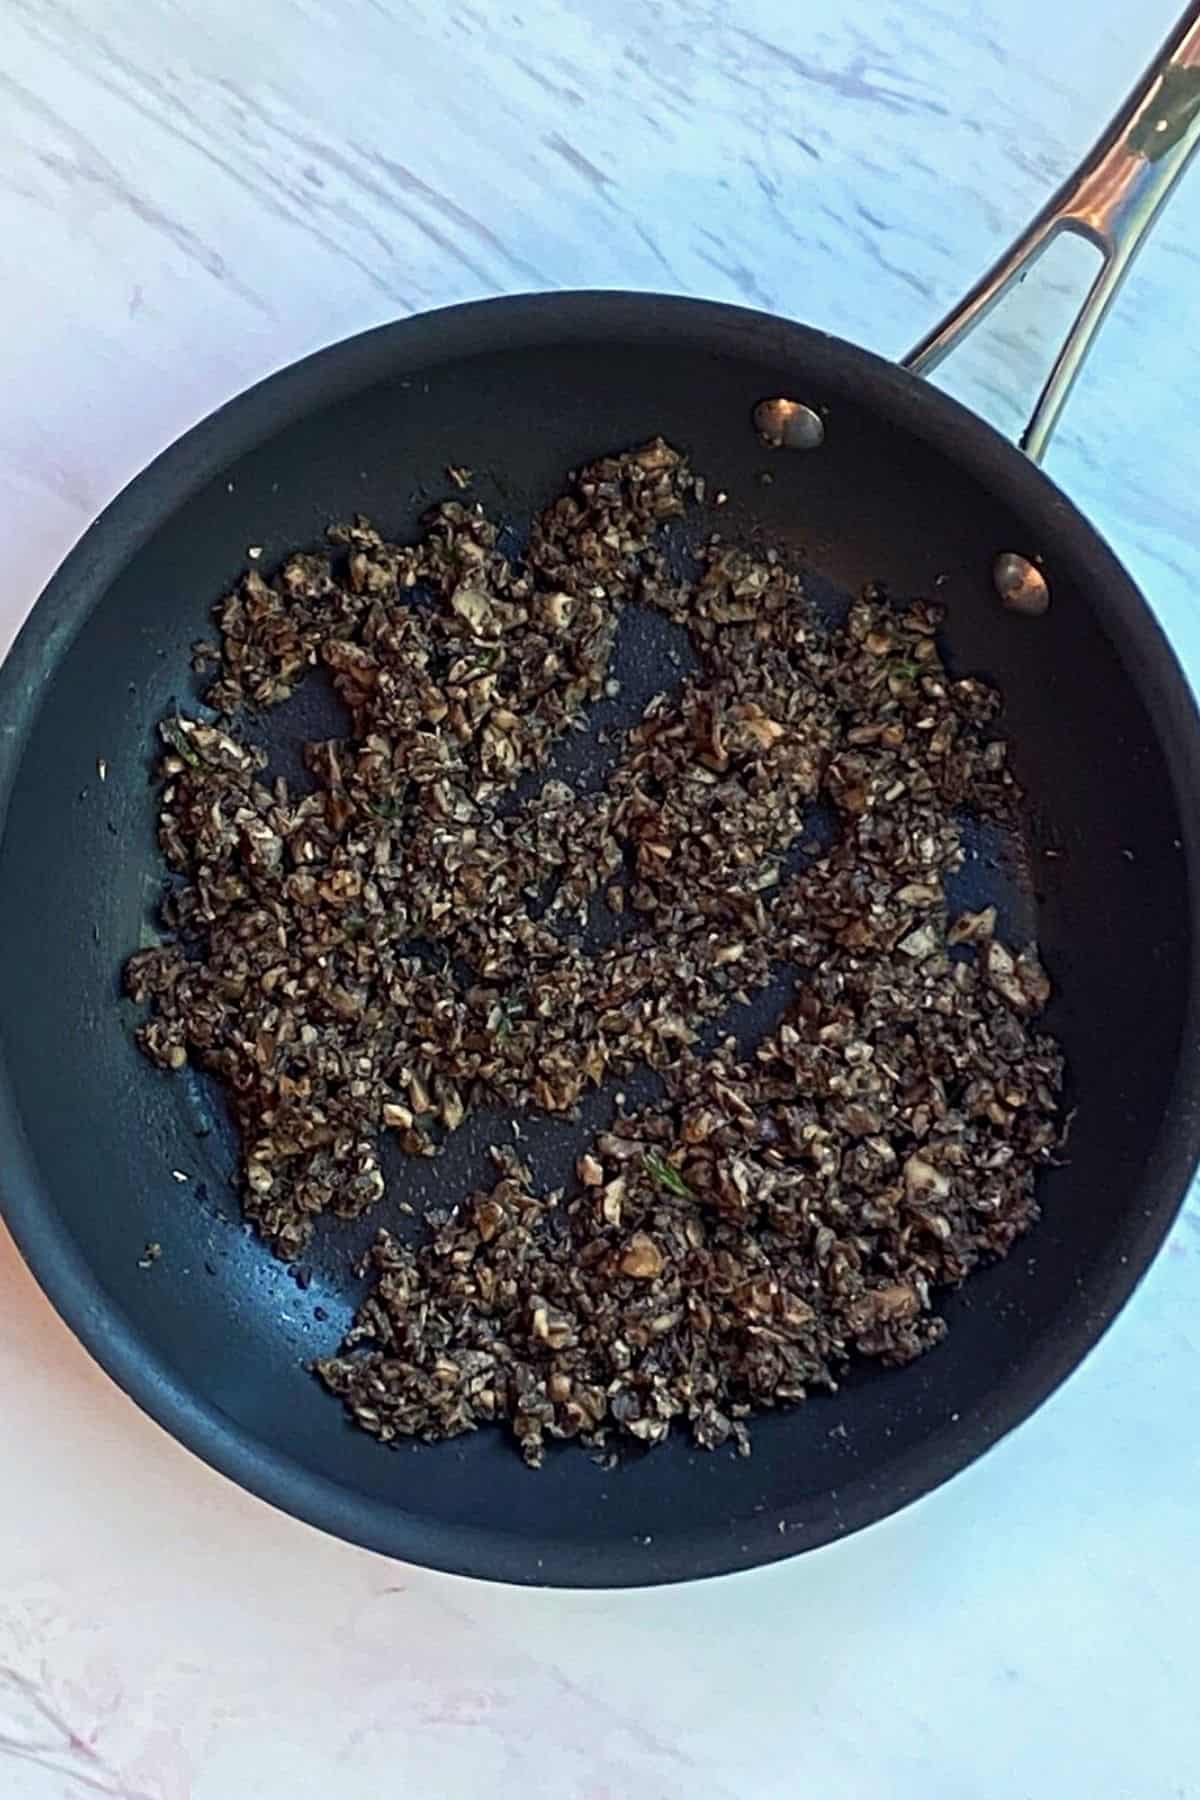 An overhead view of a pan with processed mushrooms and spices